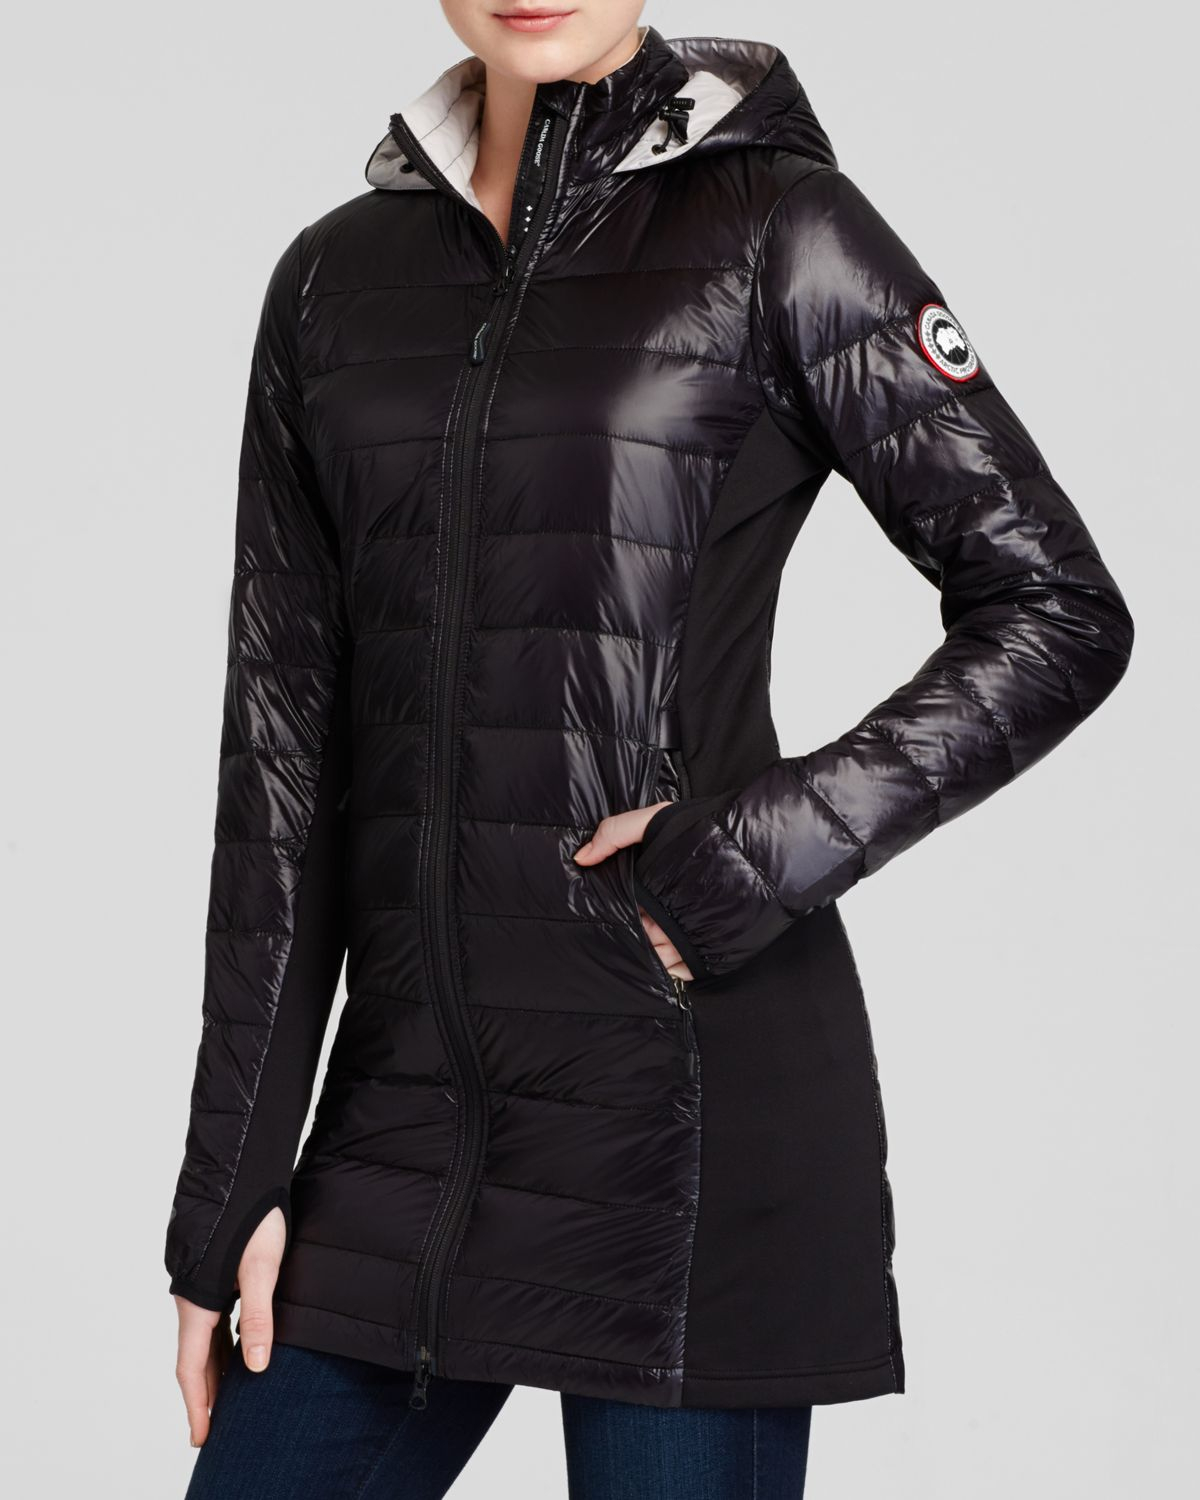 Canada Goose womens replica cheap - Very Charming Canada Goose Vest Til Salg Good In Craftwork